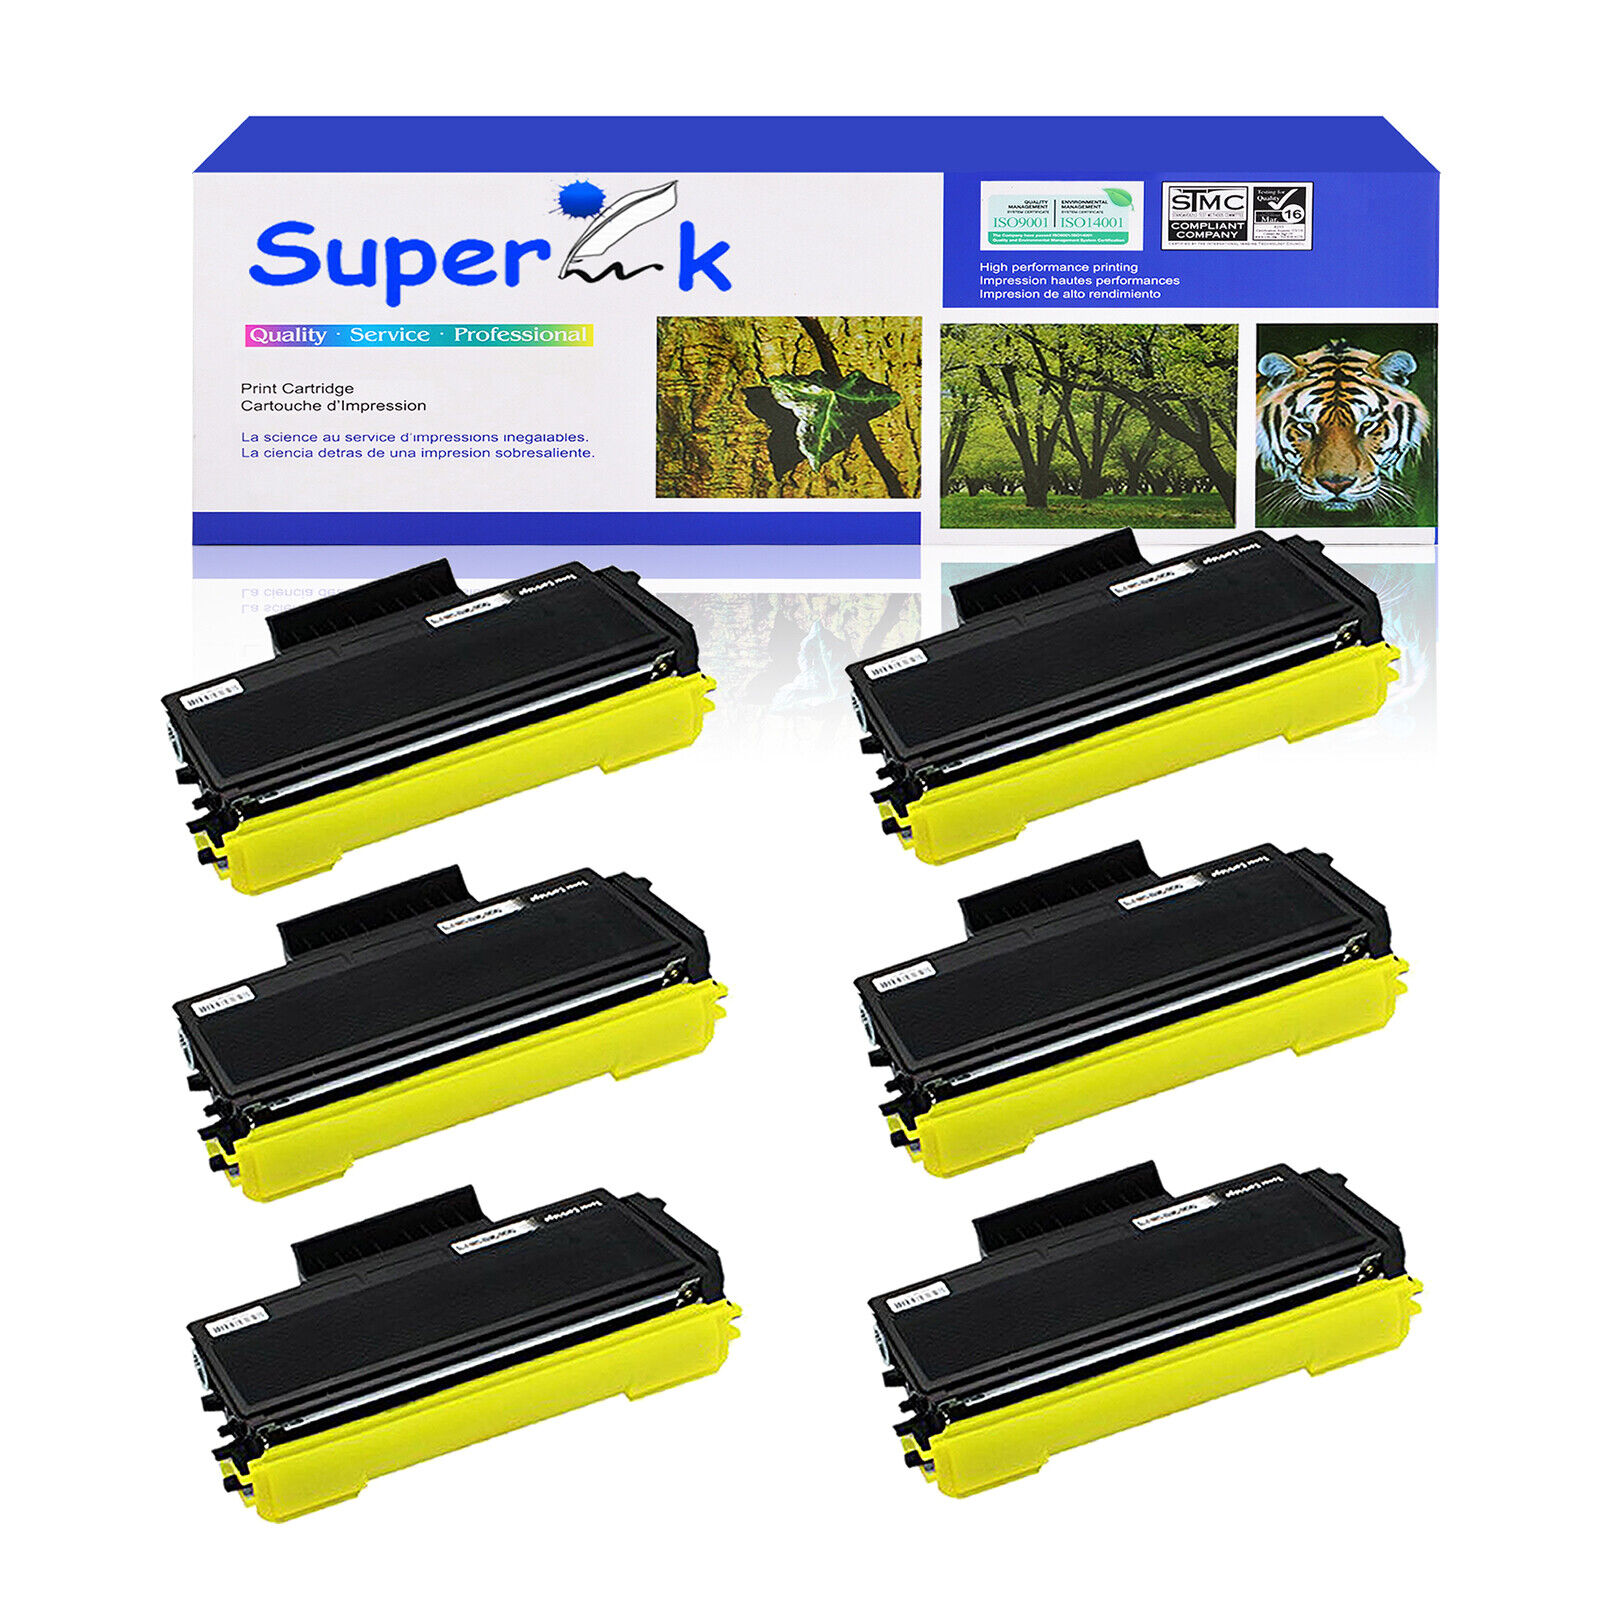 6PK TN580 Toner Cartridge for Brother TN-580 MFC-8460N DCP-8060 HL-5280 5270DN